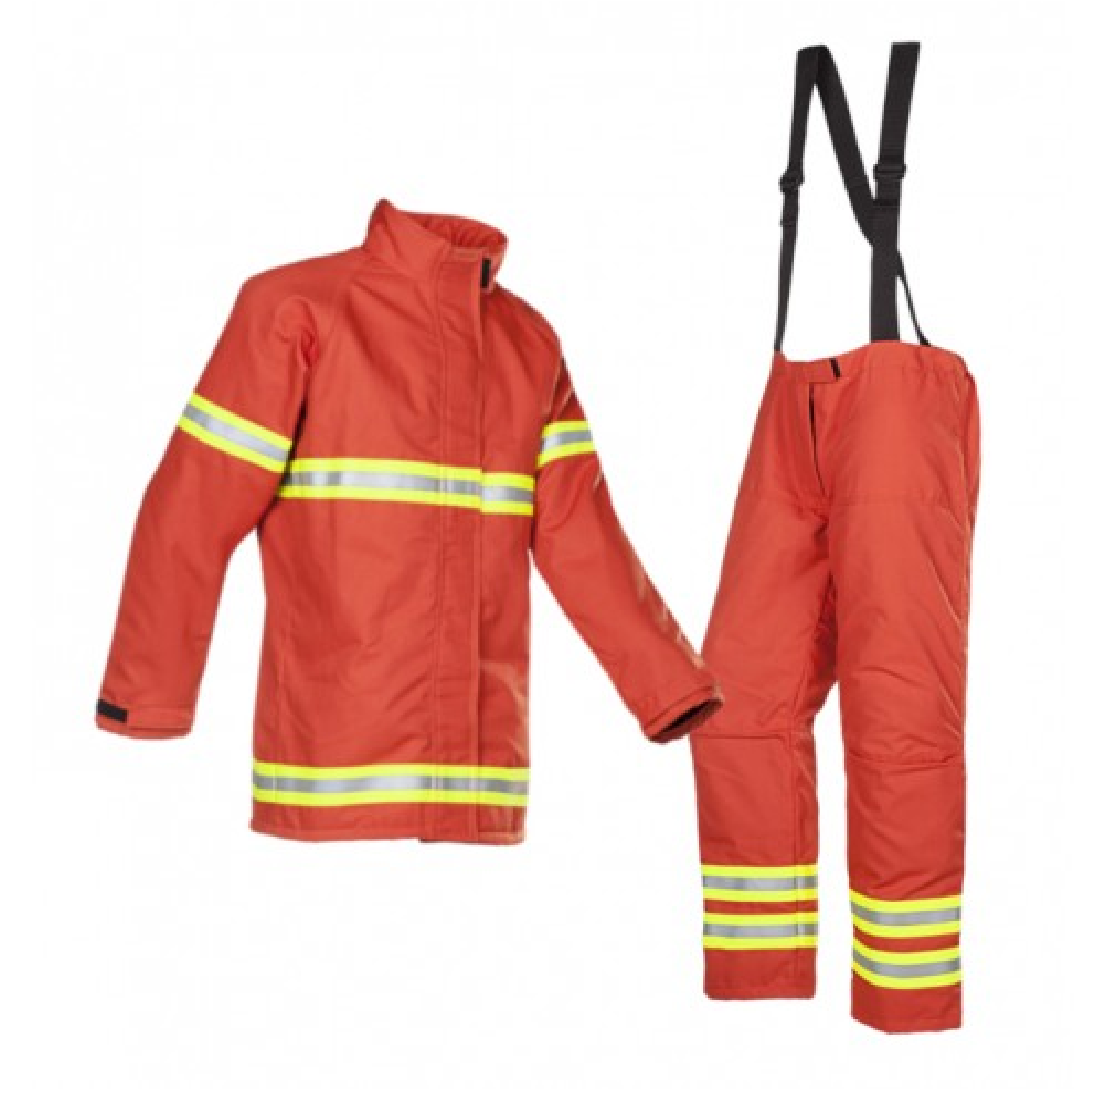 MULLION Fire Fighting Suit (Intervention Jacket & Pants With SUSPENDERS)